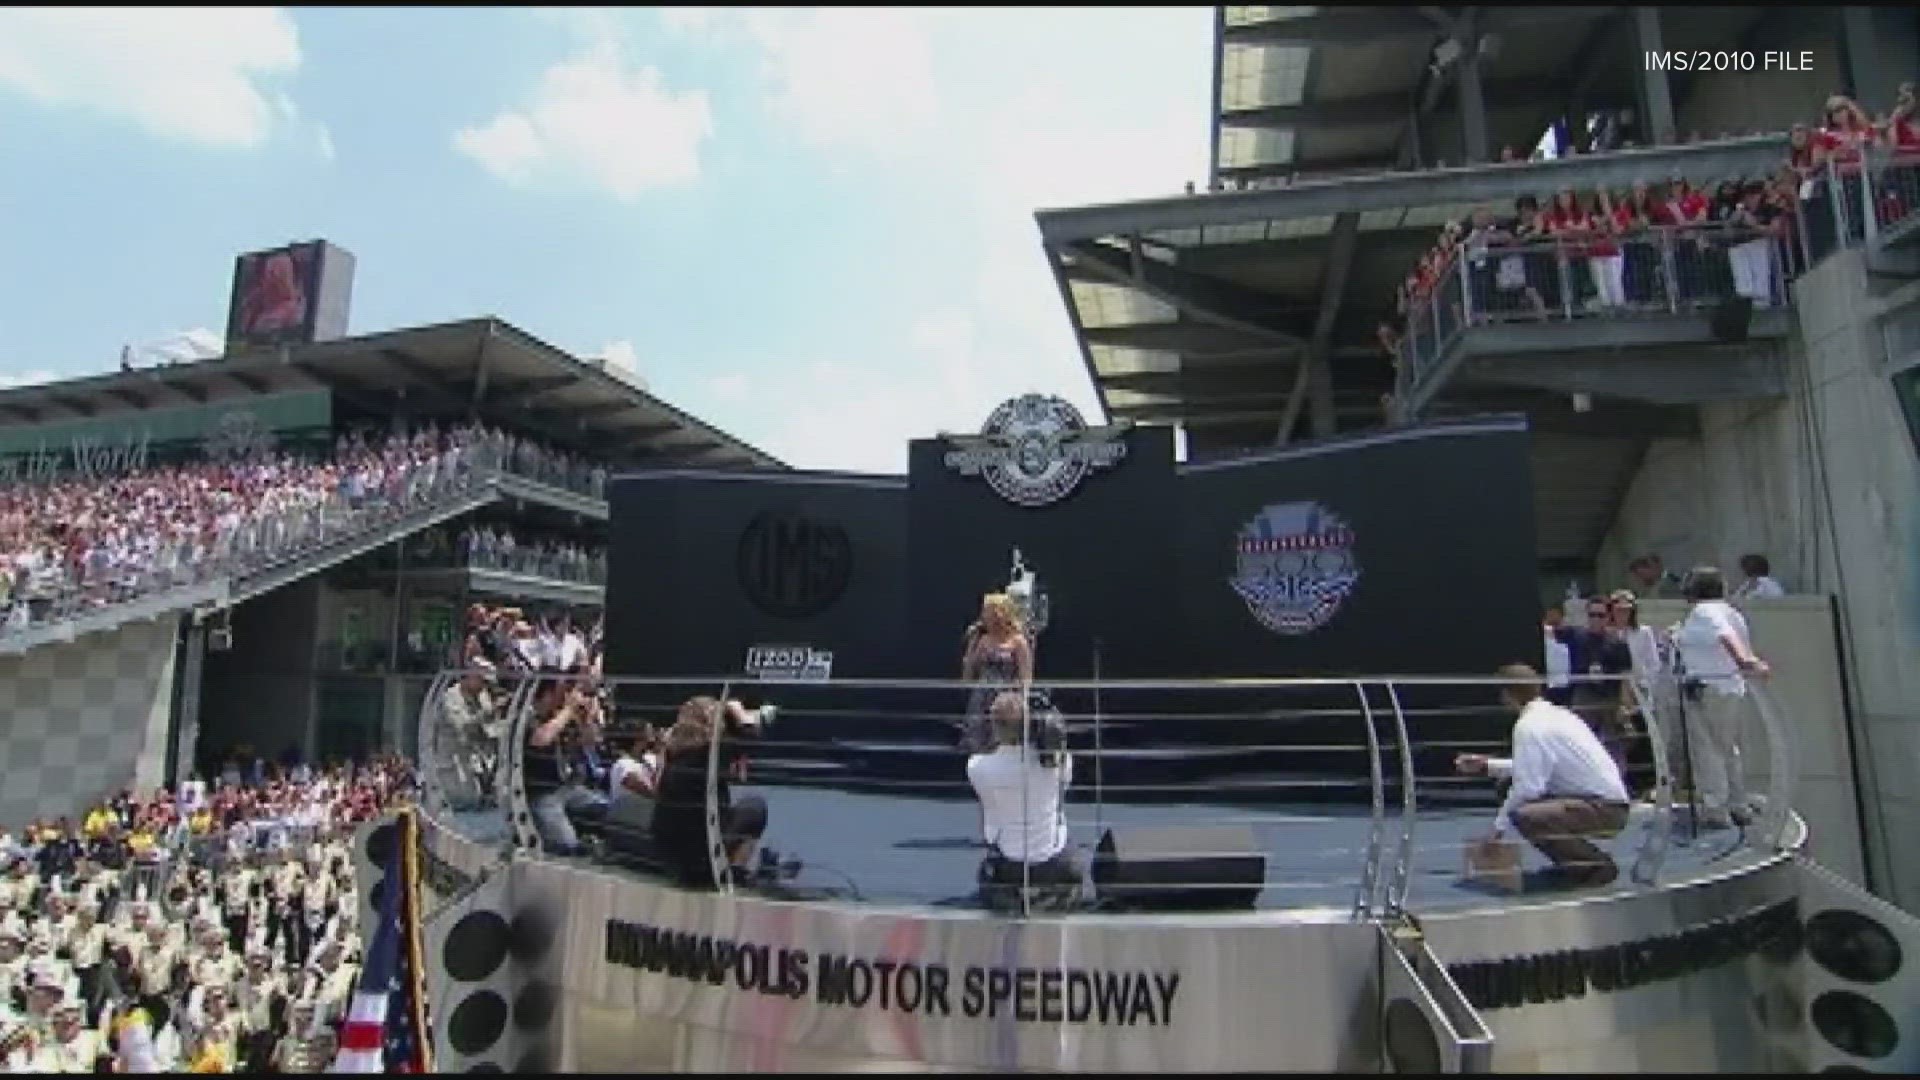 Jewel last sung the national anthem at the Indianapolis 500 in 2010.